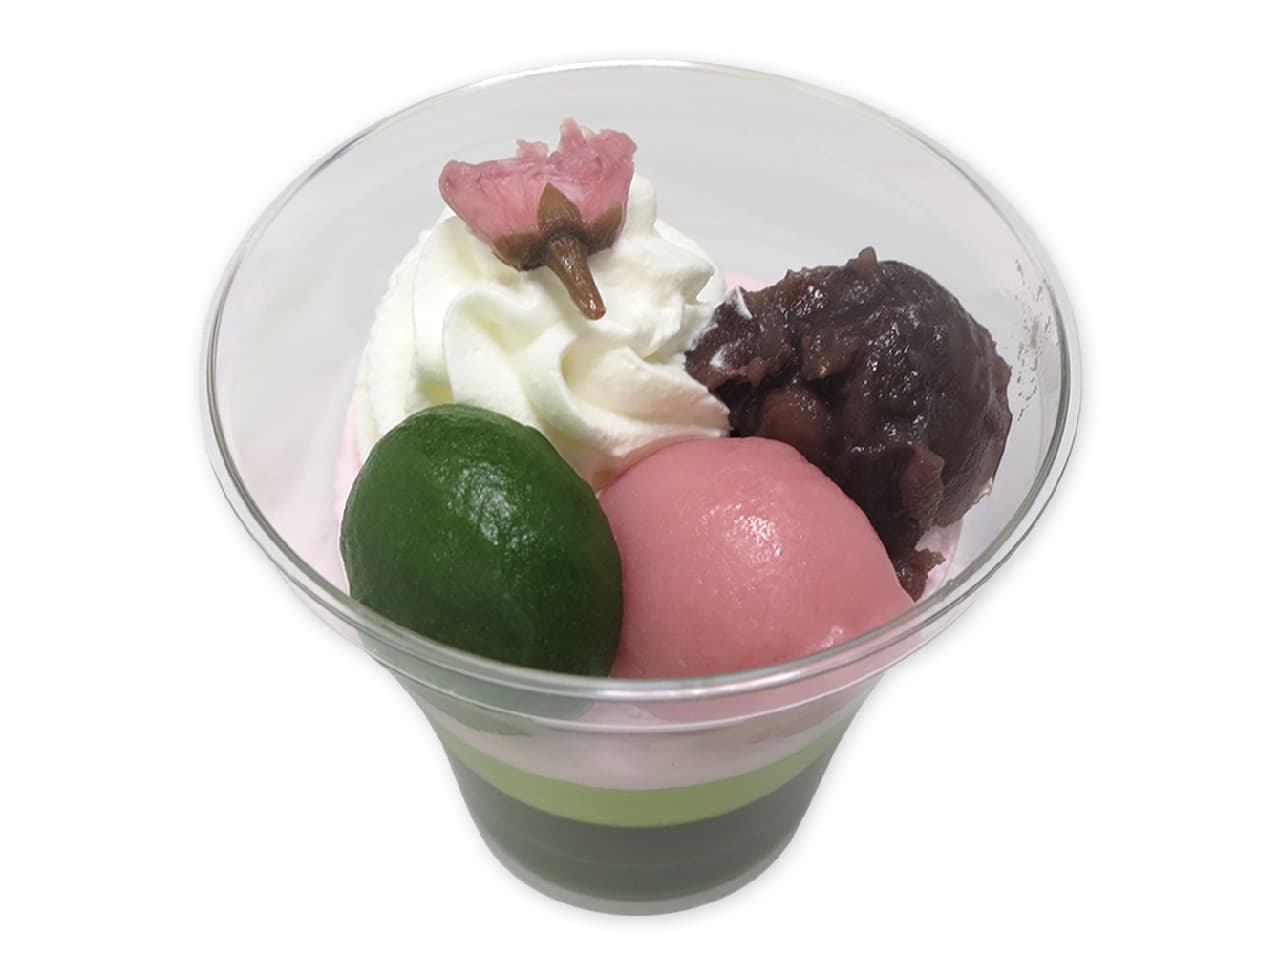 7-ELEVEN "Uji green tea and cherry blossom parfait supervised by Kyuemon Ito